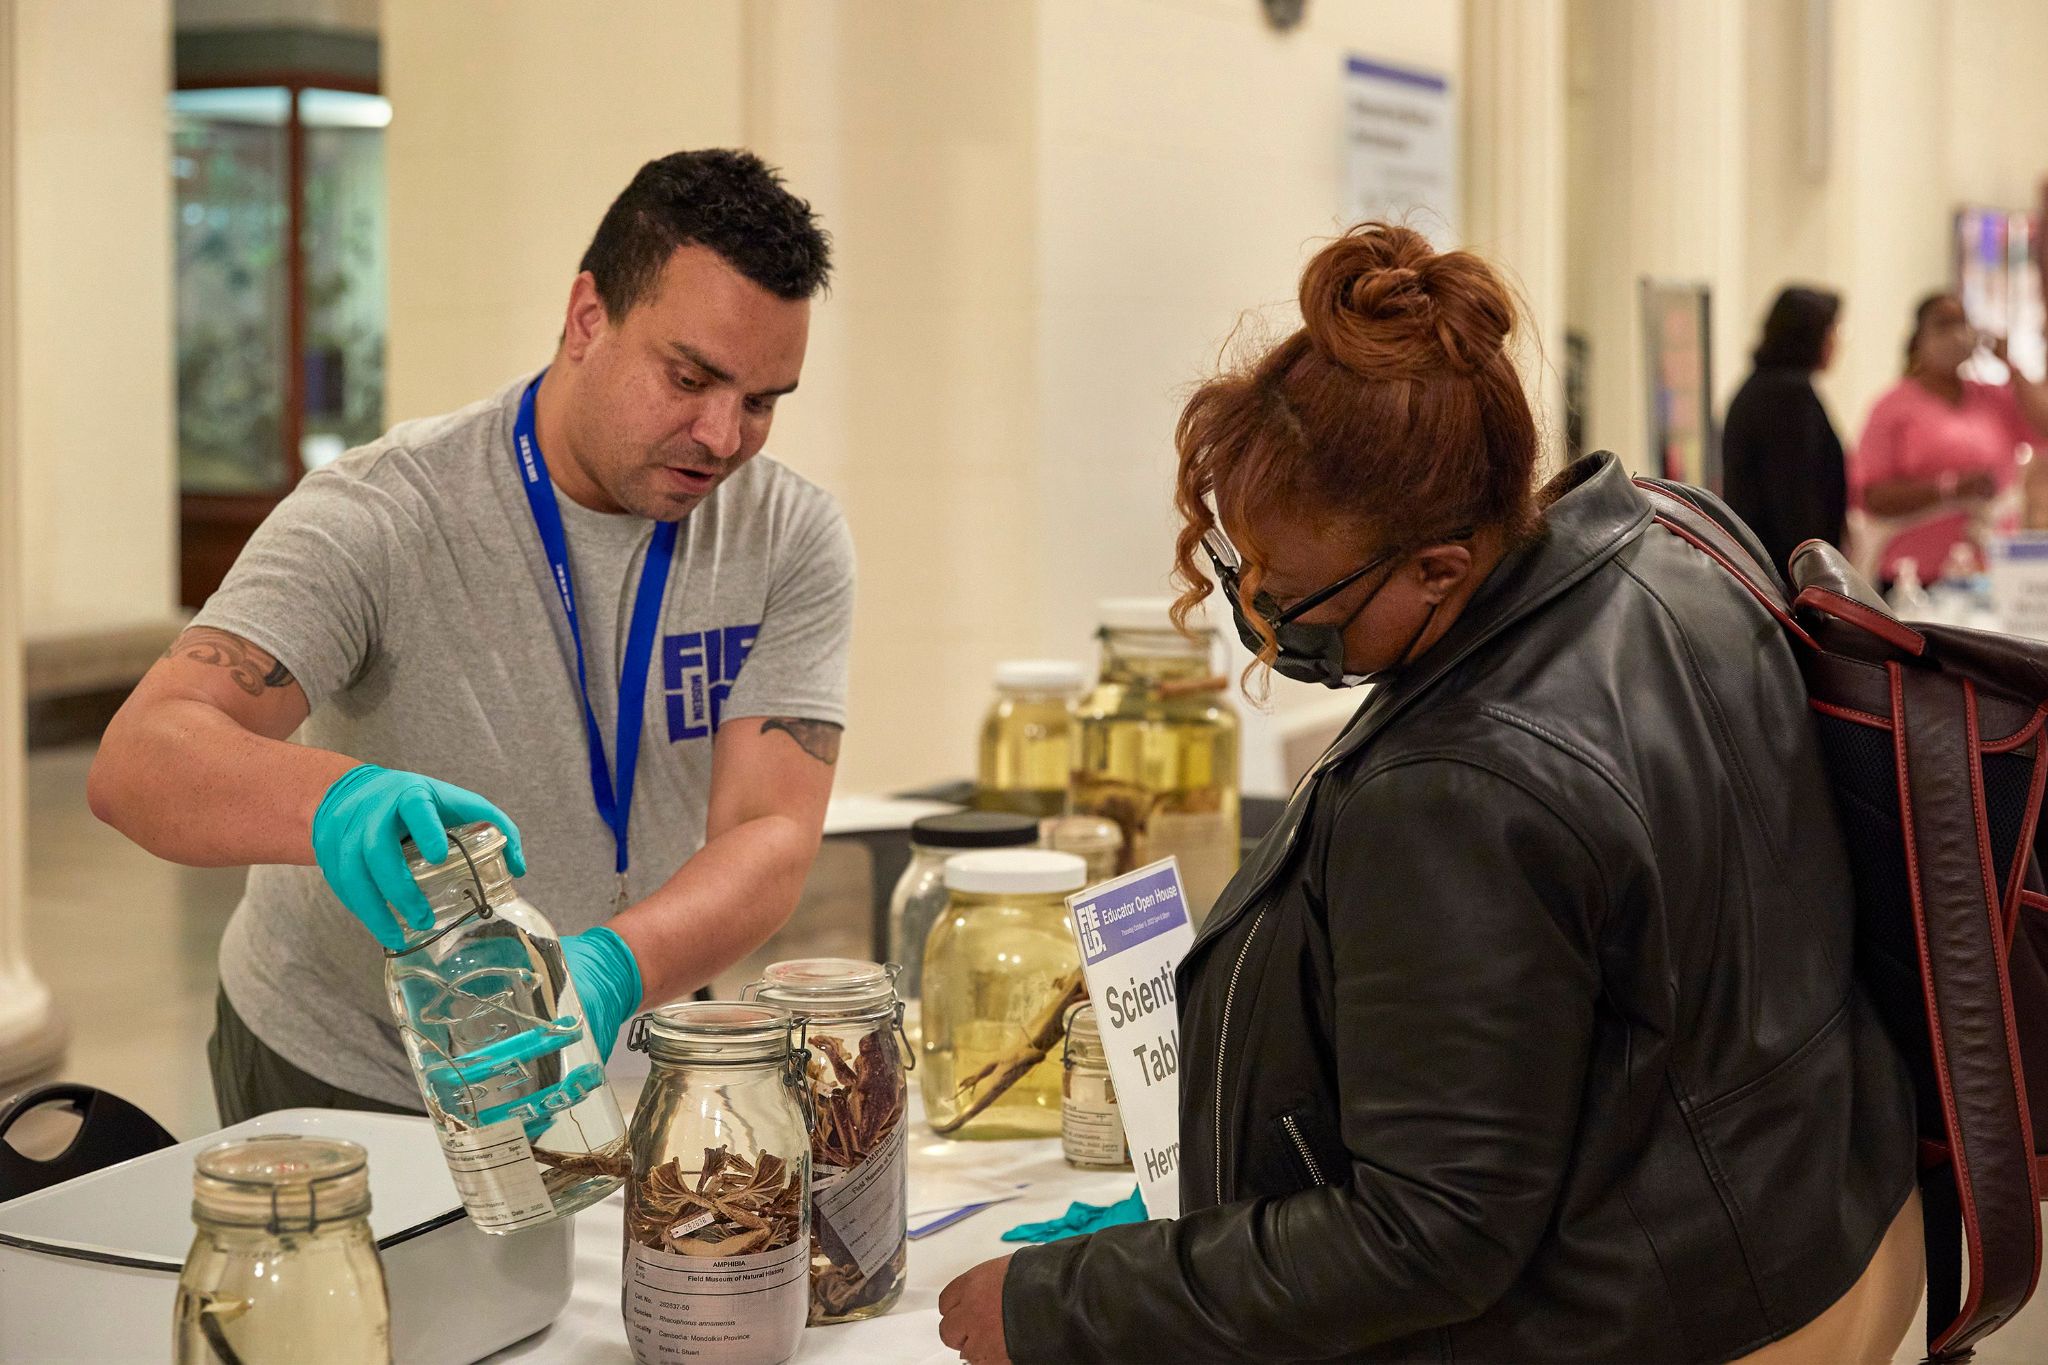 A museum staff member interacts with a visitor, showing specimens in jars.